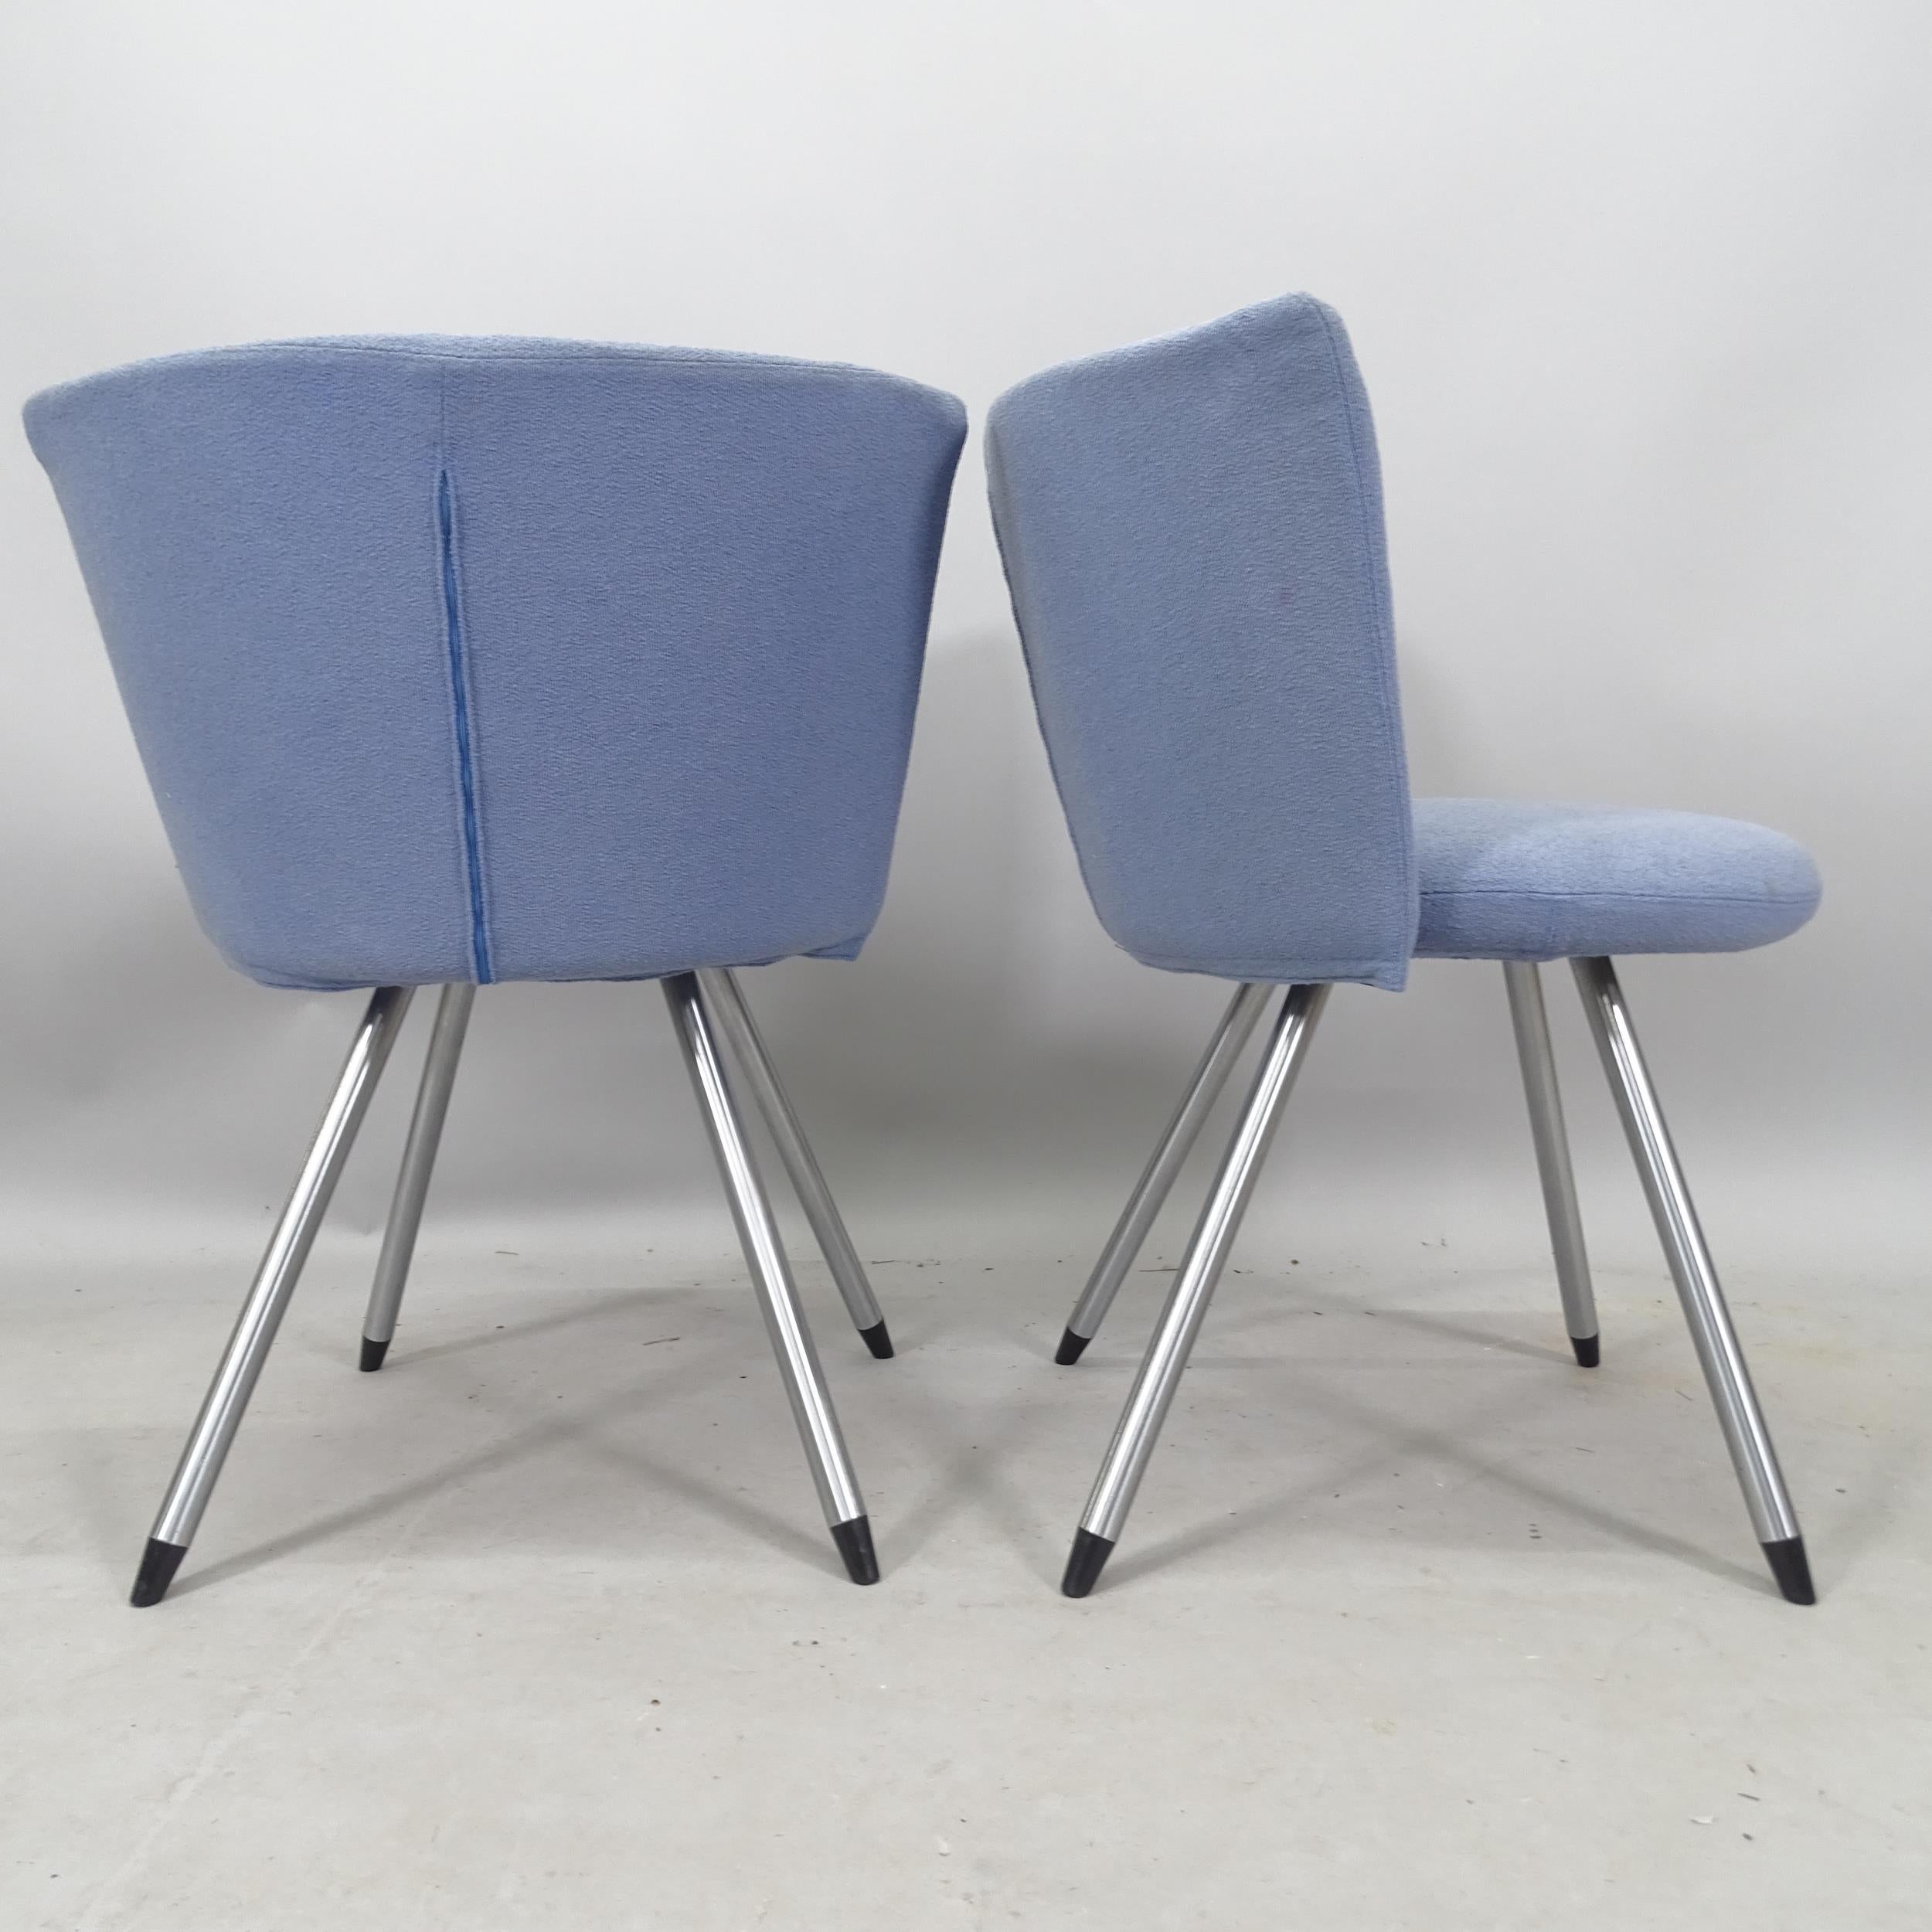 Velvet A Pair of Blue Cocktail Chairs Model Ej11 by Team Foersom & Hiort Lorenzen For Sale